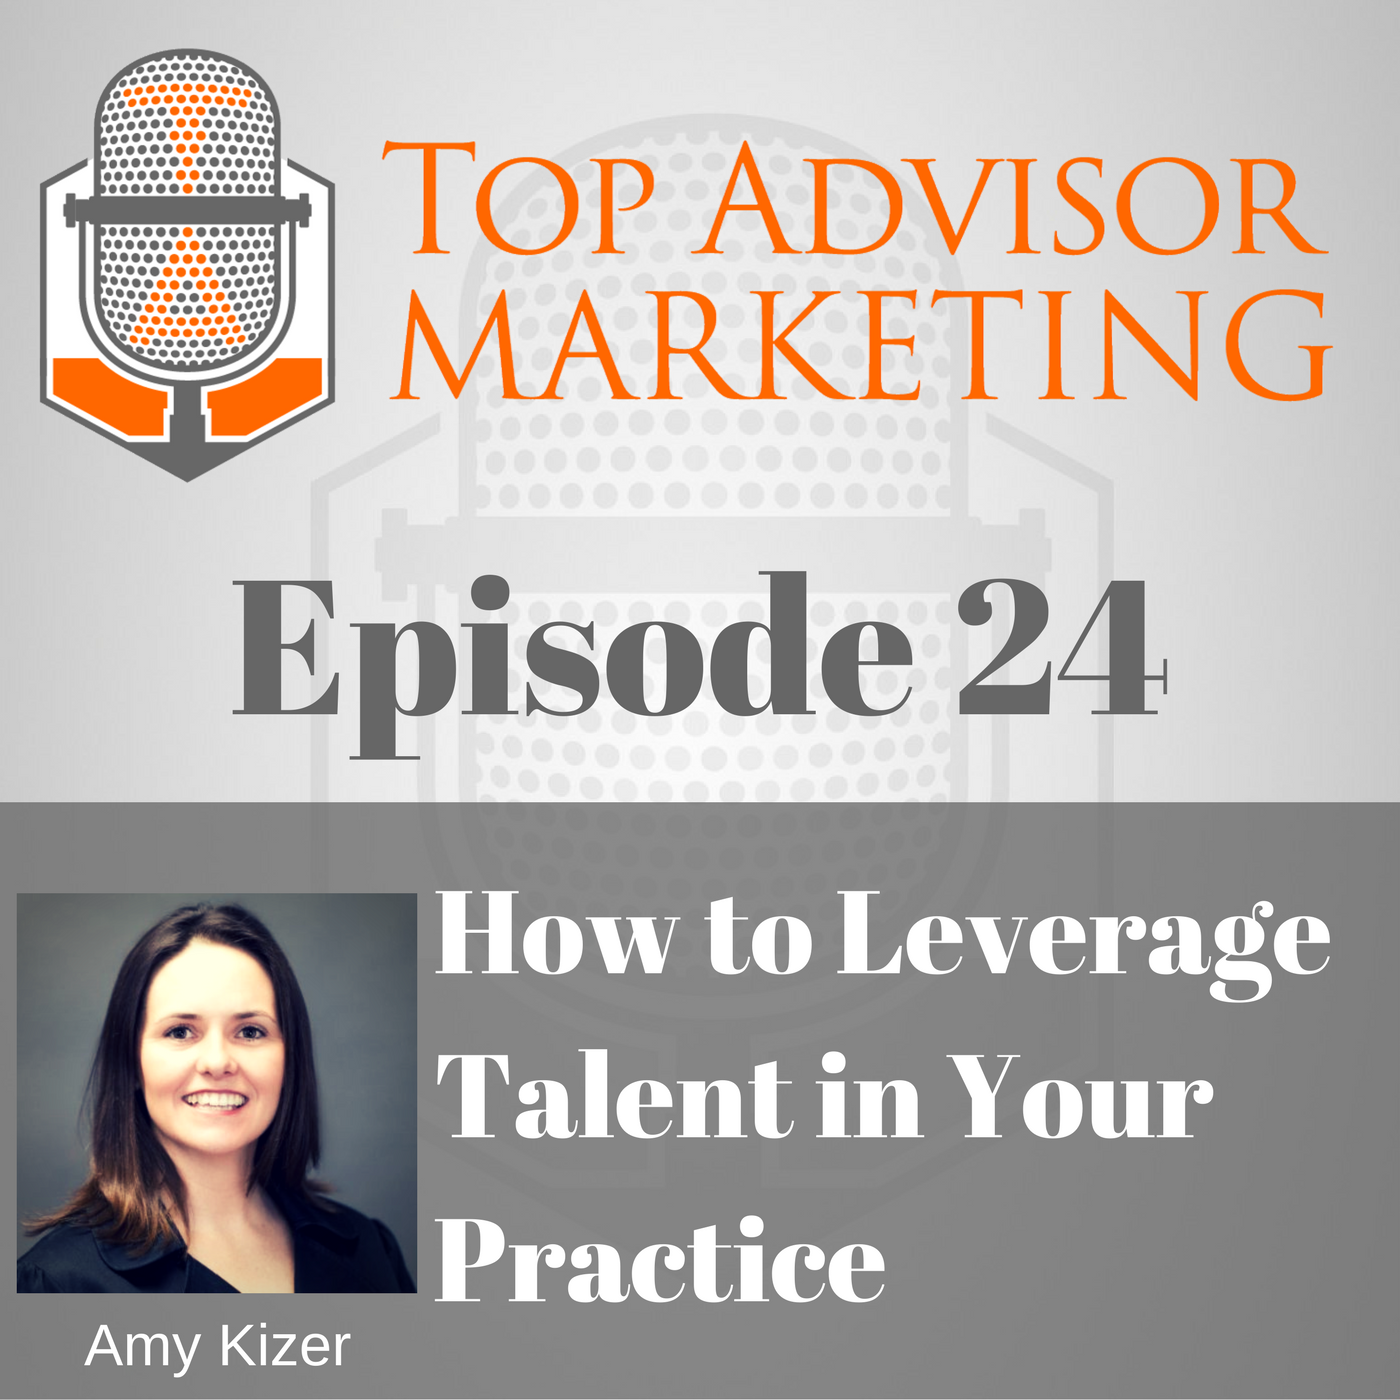 Episode 24 - How to Leverage Talent in Your Practice